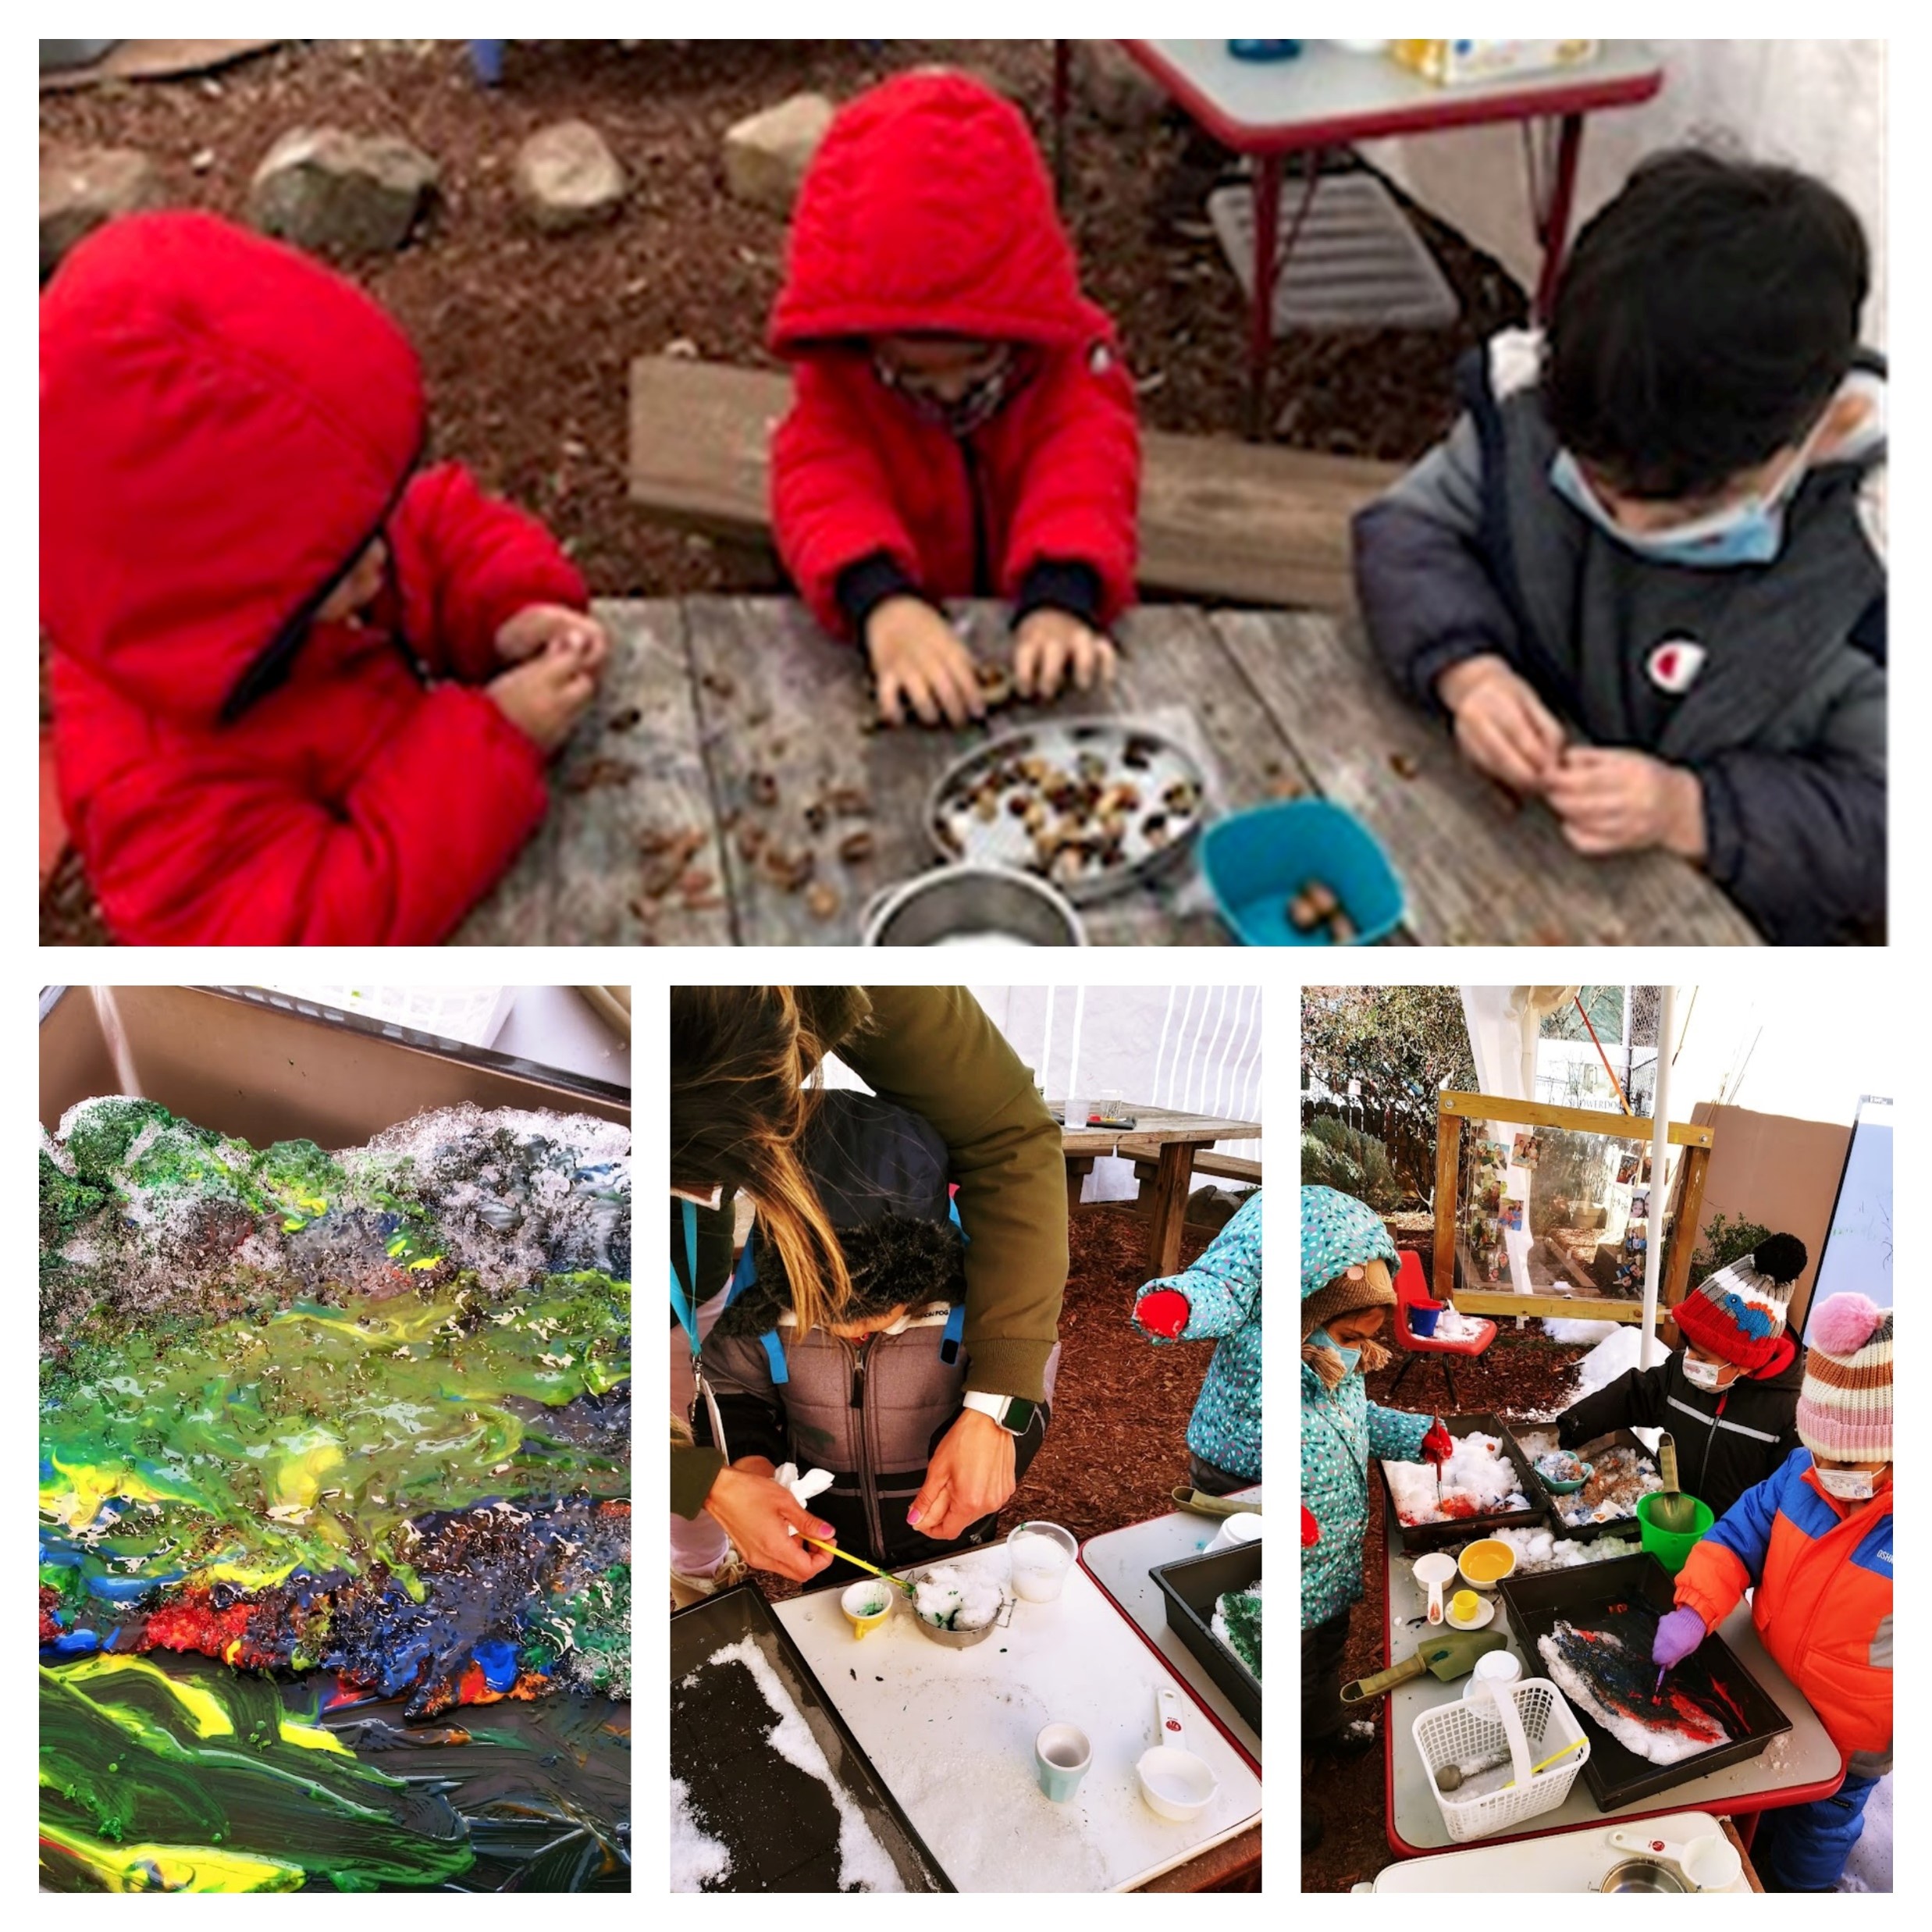 A collage of four photos featuring children engaged in playful outdoor learning.